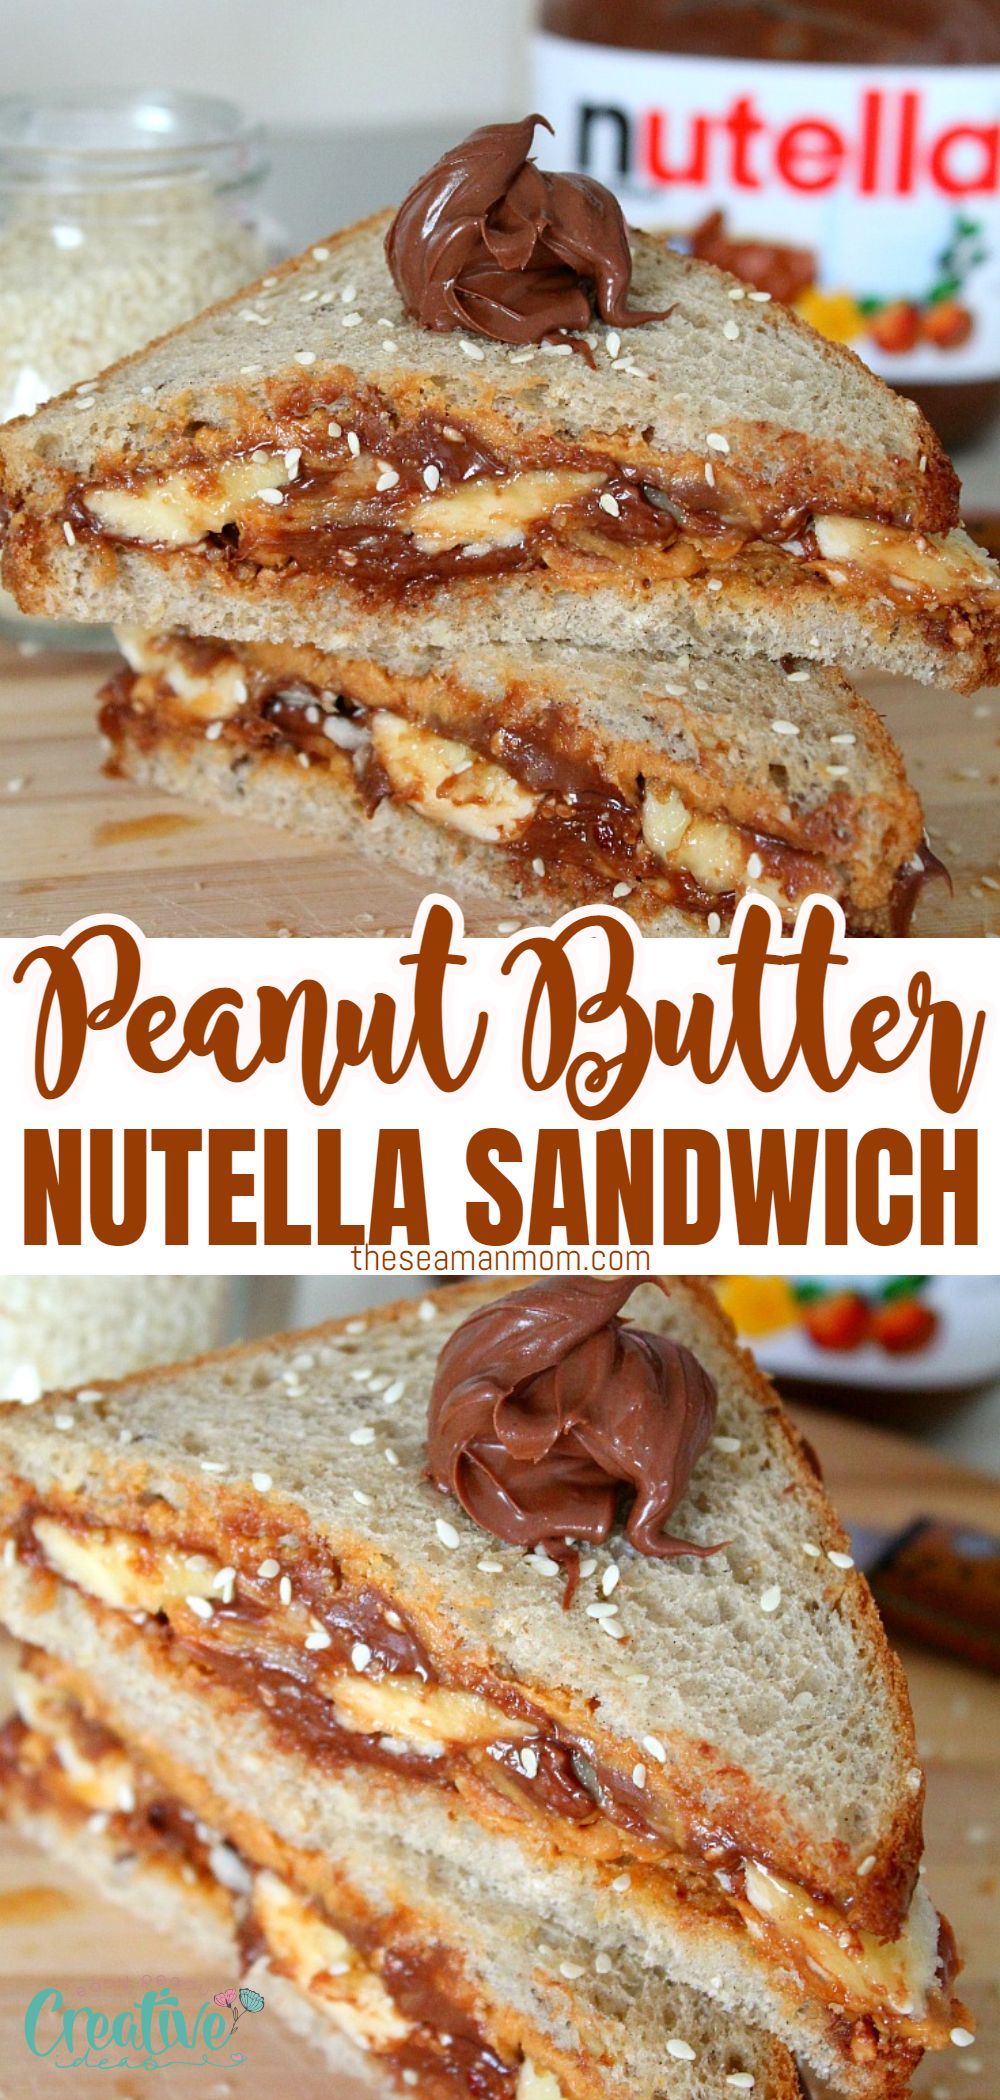 This Peanut Butter and Nutella sandwich is real guilty pleasure! This delicious Nutella peanut butter combination will totally rock your world while helping you start the day right! via @petroneagu